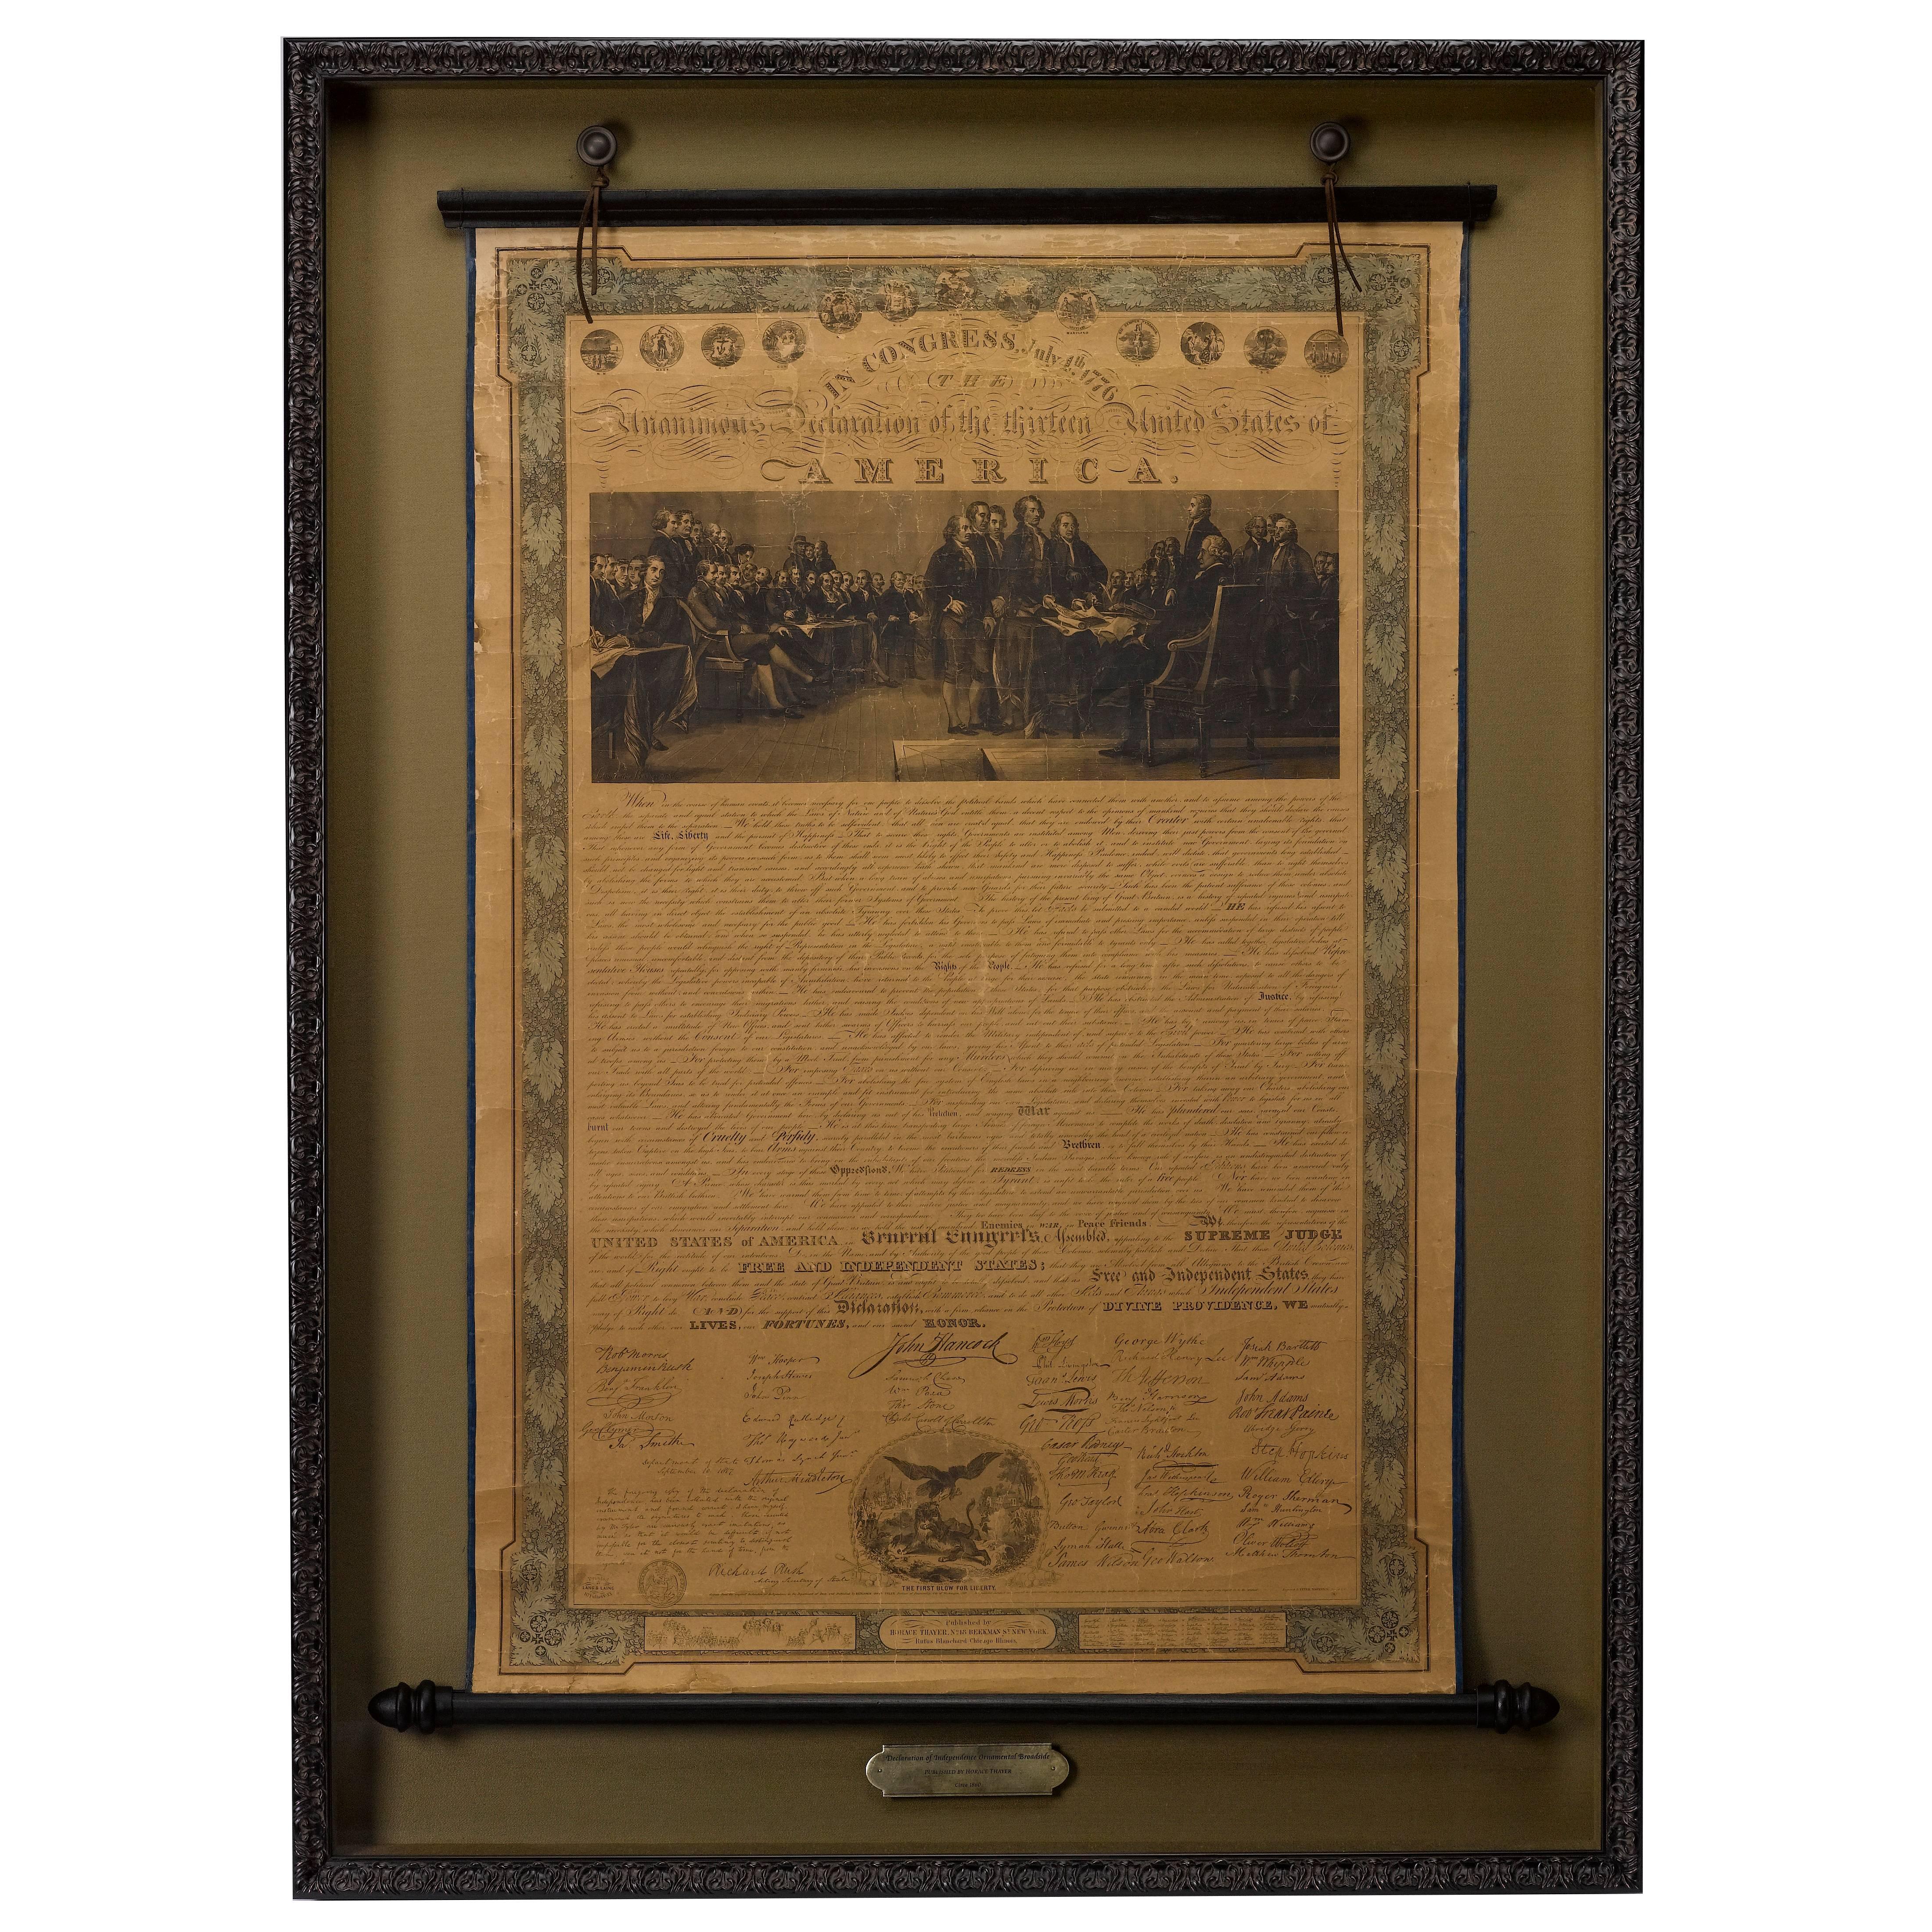 Declaration of Independence Broadside Published by Horace Thayer, circa 1860